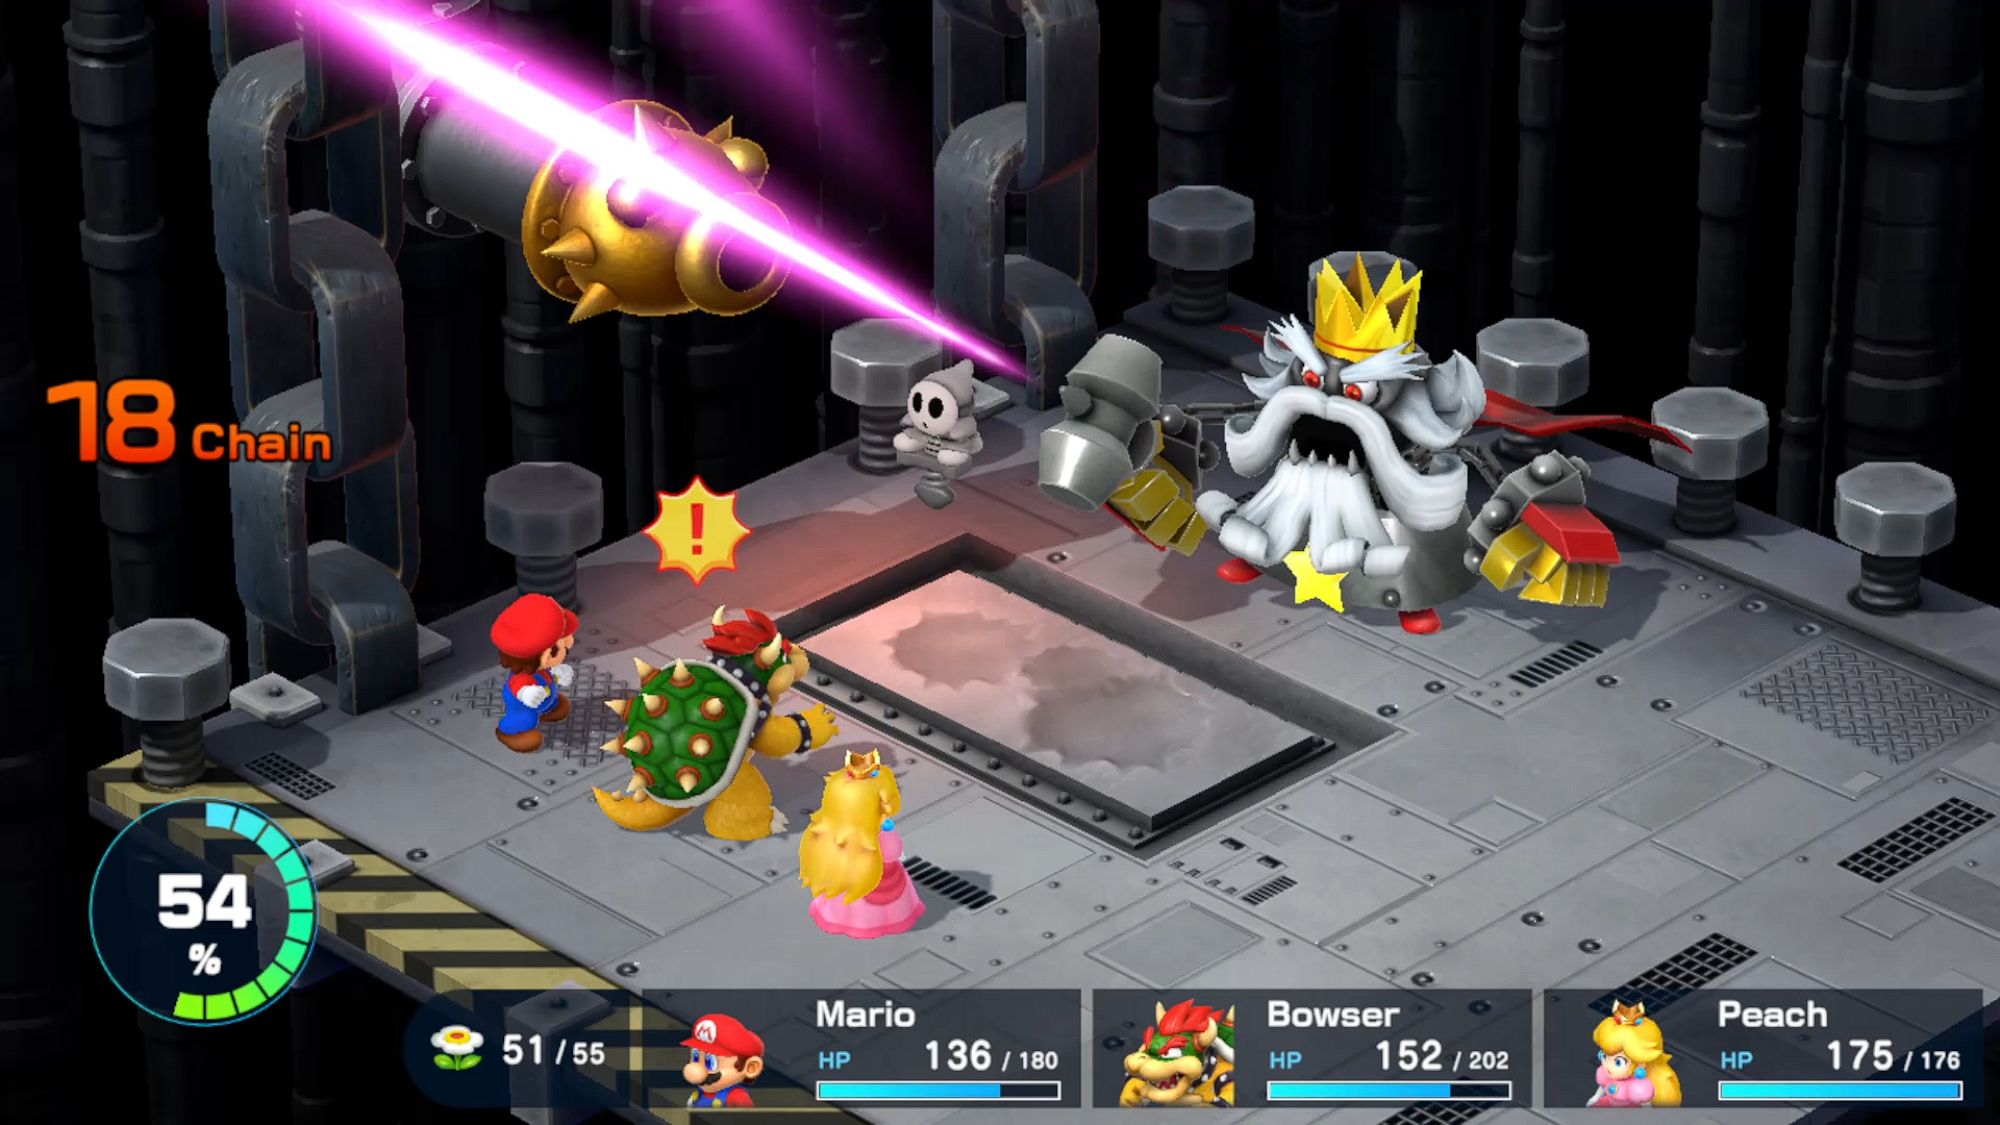 Super Mario RPG Smithy Casting A Fire Saber Against Bowser